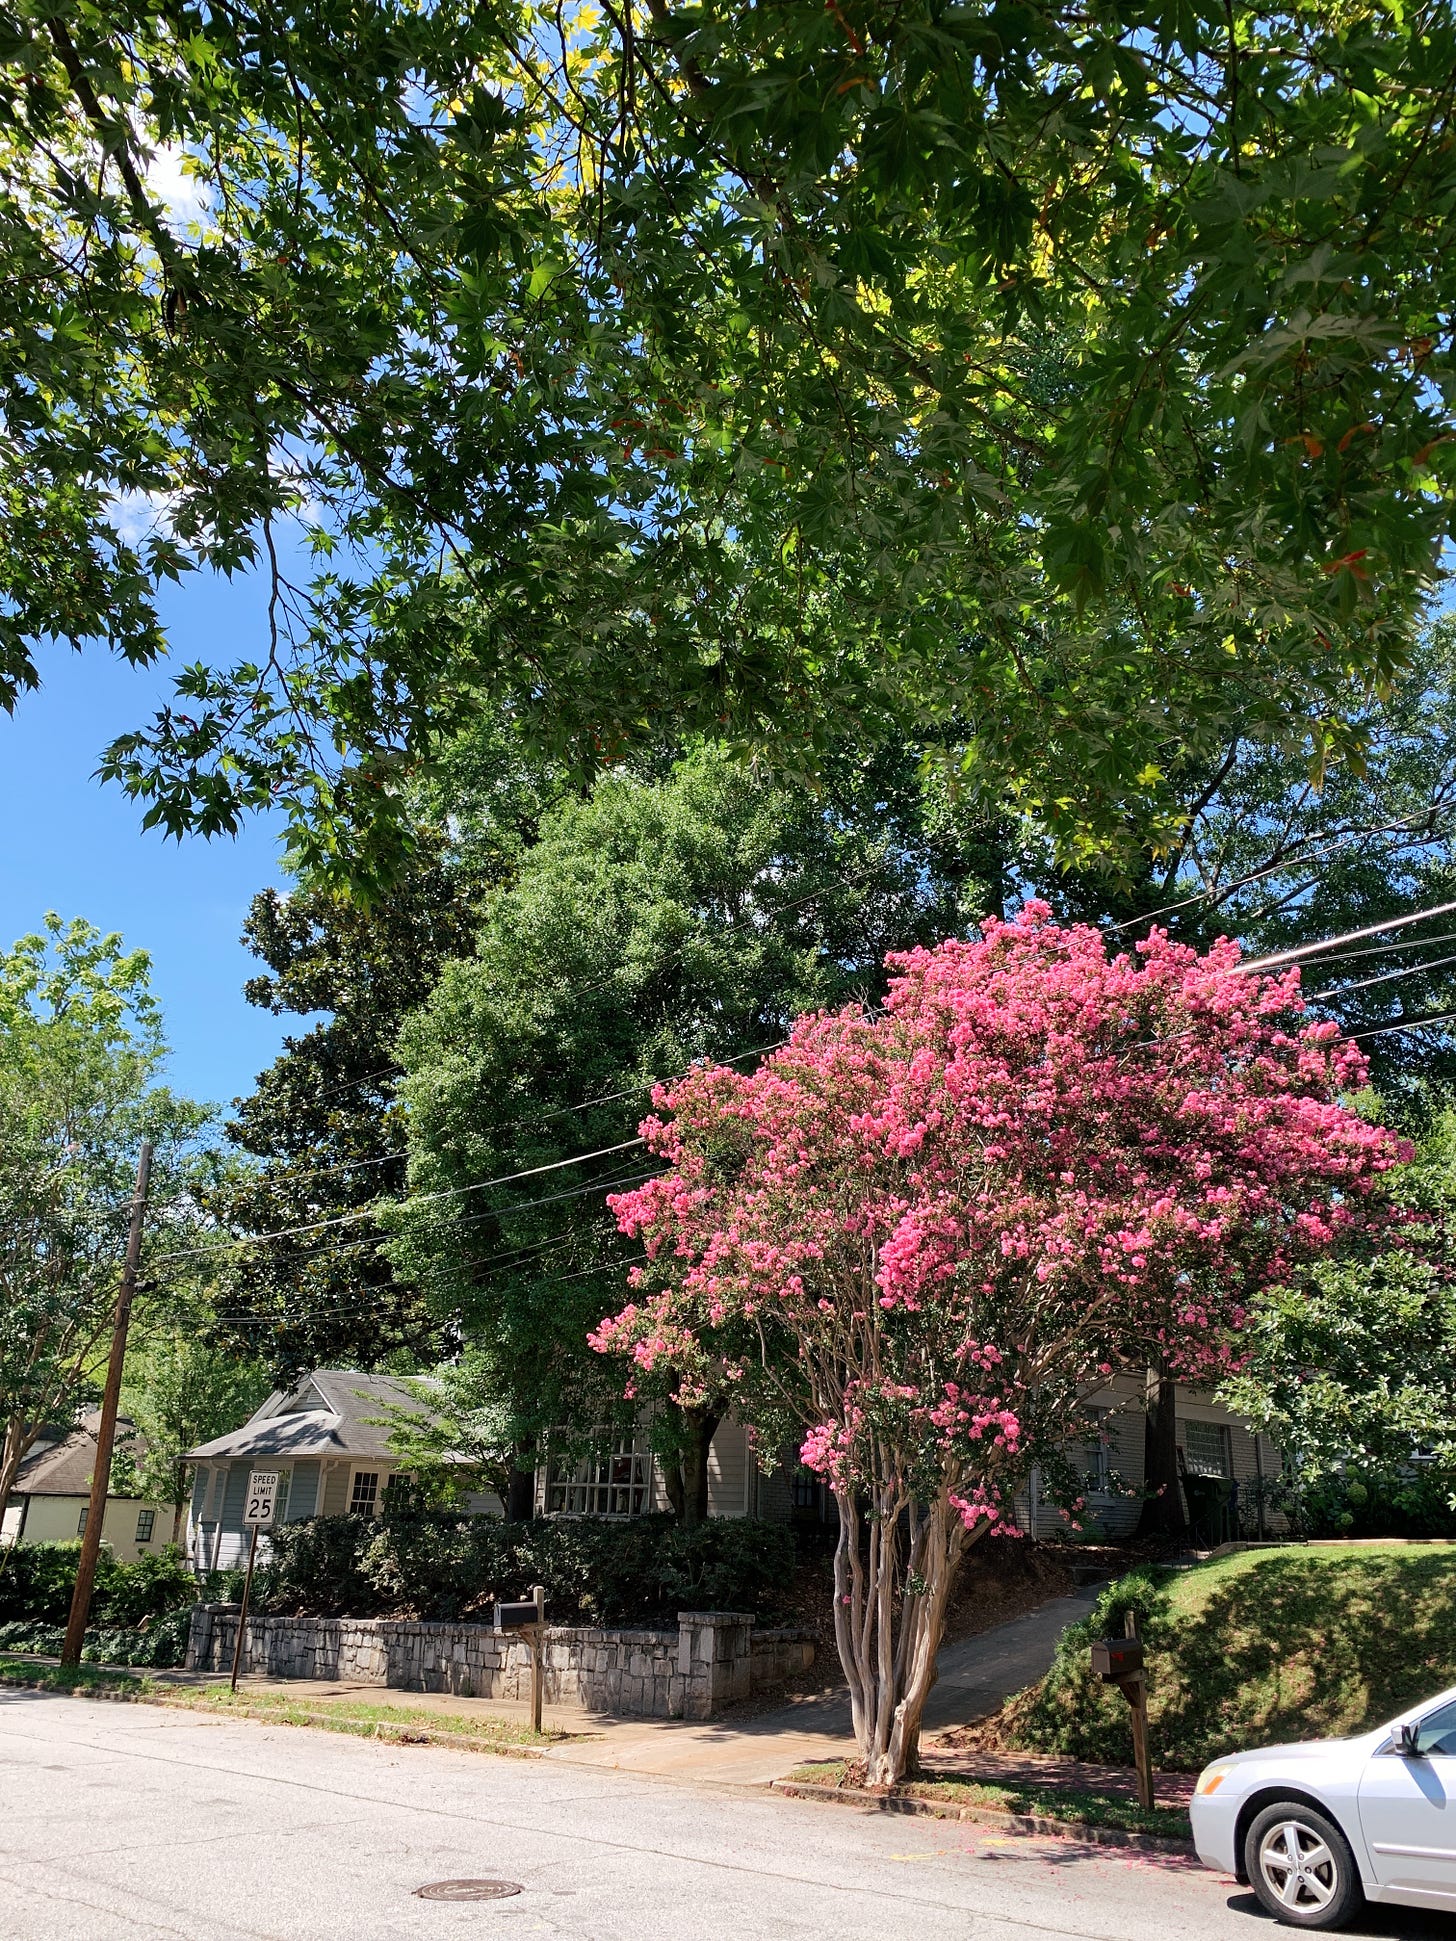 A hot pink crepe myrtle standing tall near a tree-covered city neighborhood.